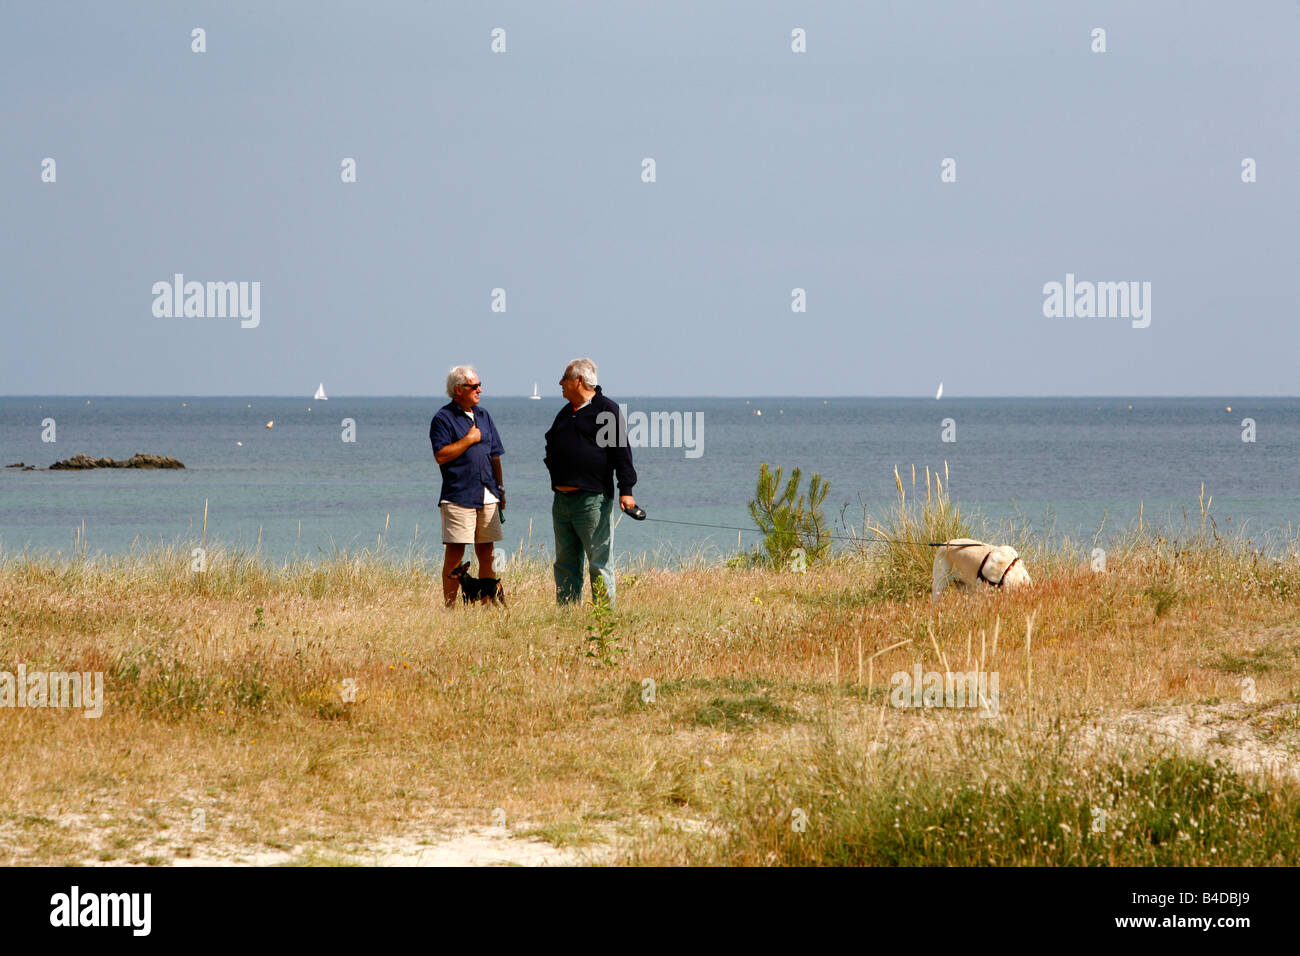 July 2008 - People walking with their dogs by the beach in carnac Morbihan Coast Brittany France Stock Photo